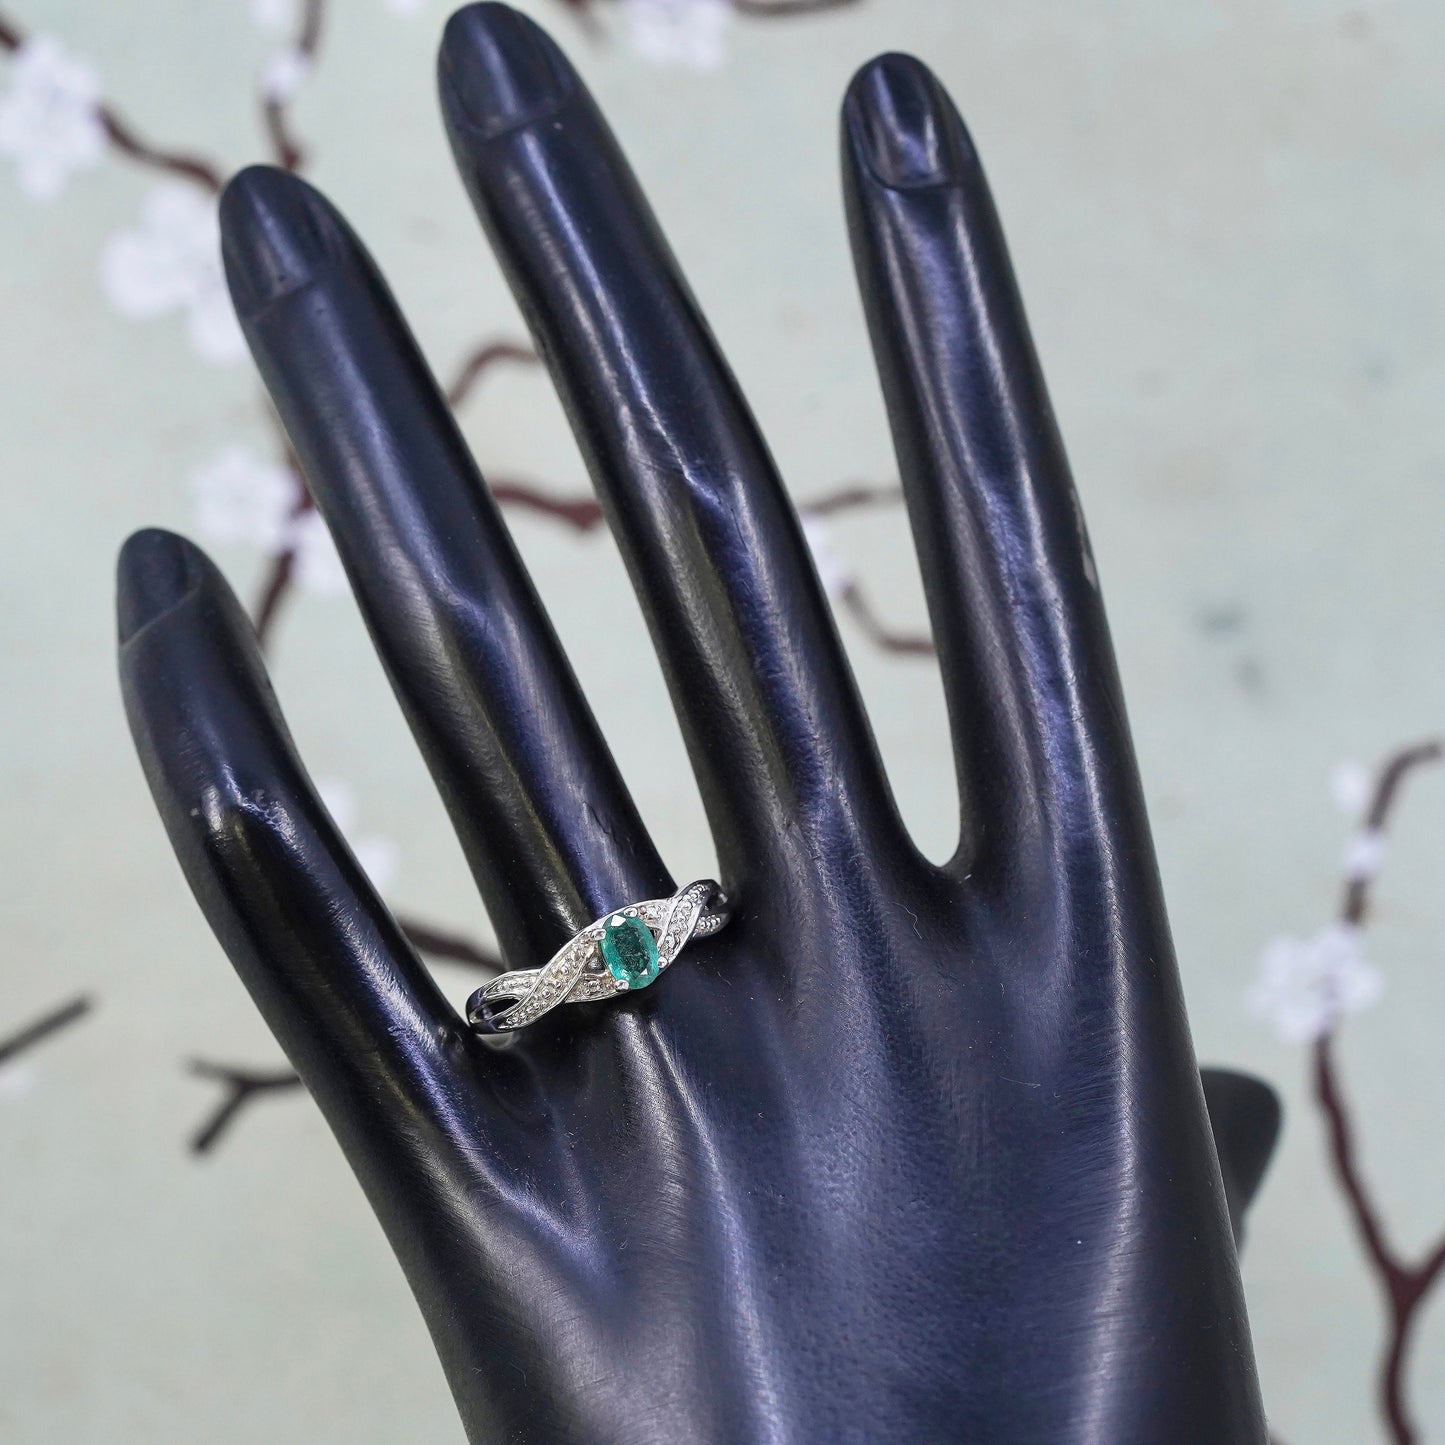 Size 10, Vintage sterling silver thin band ring with emerald